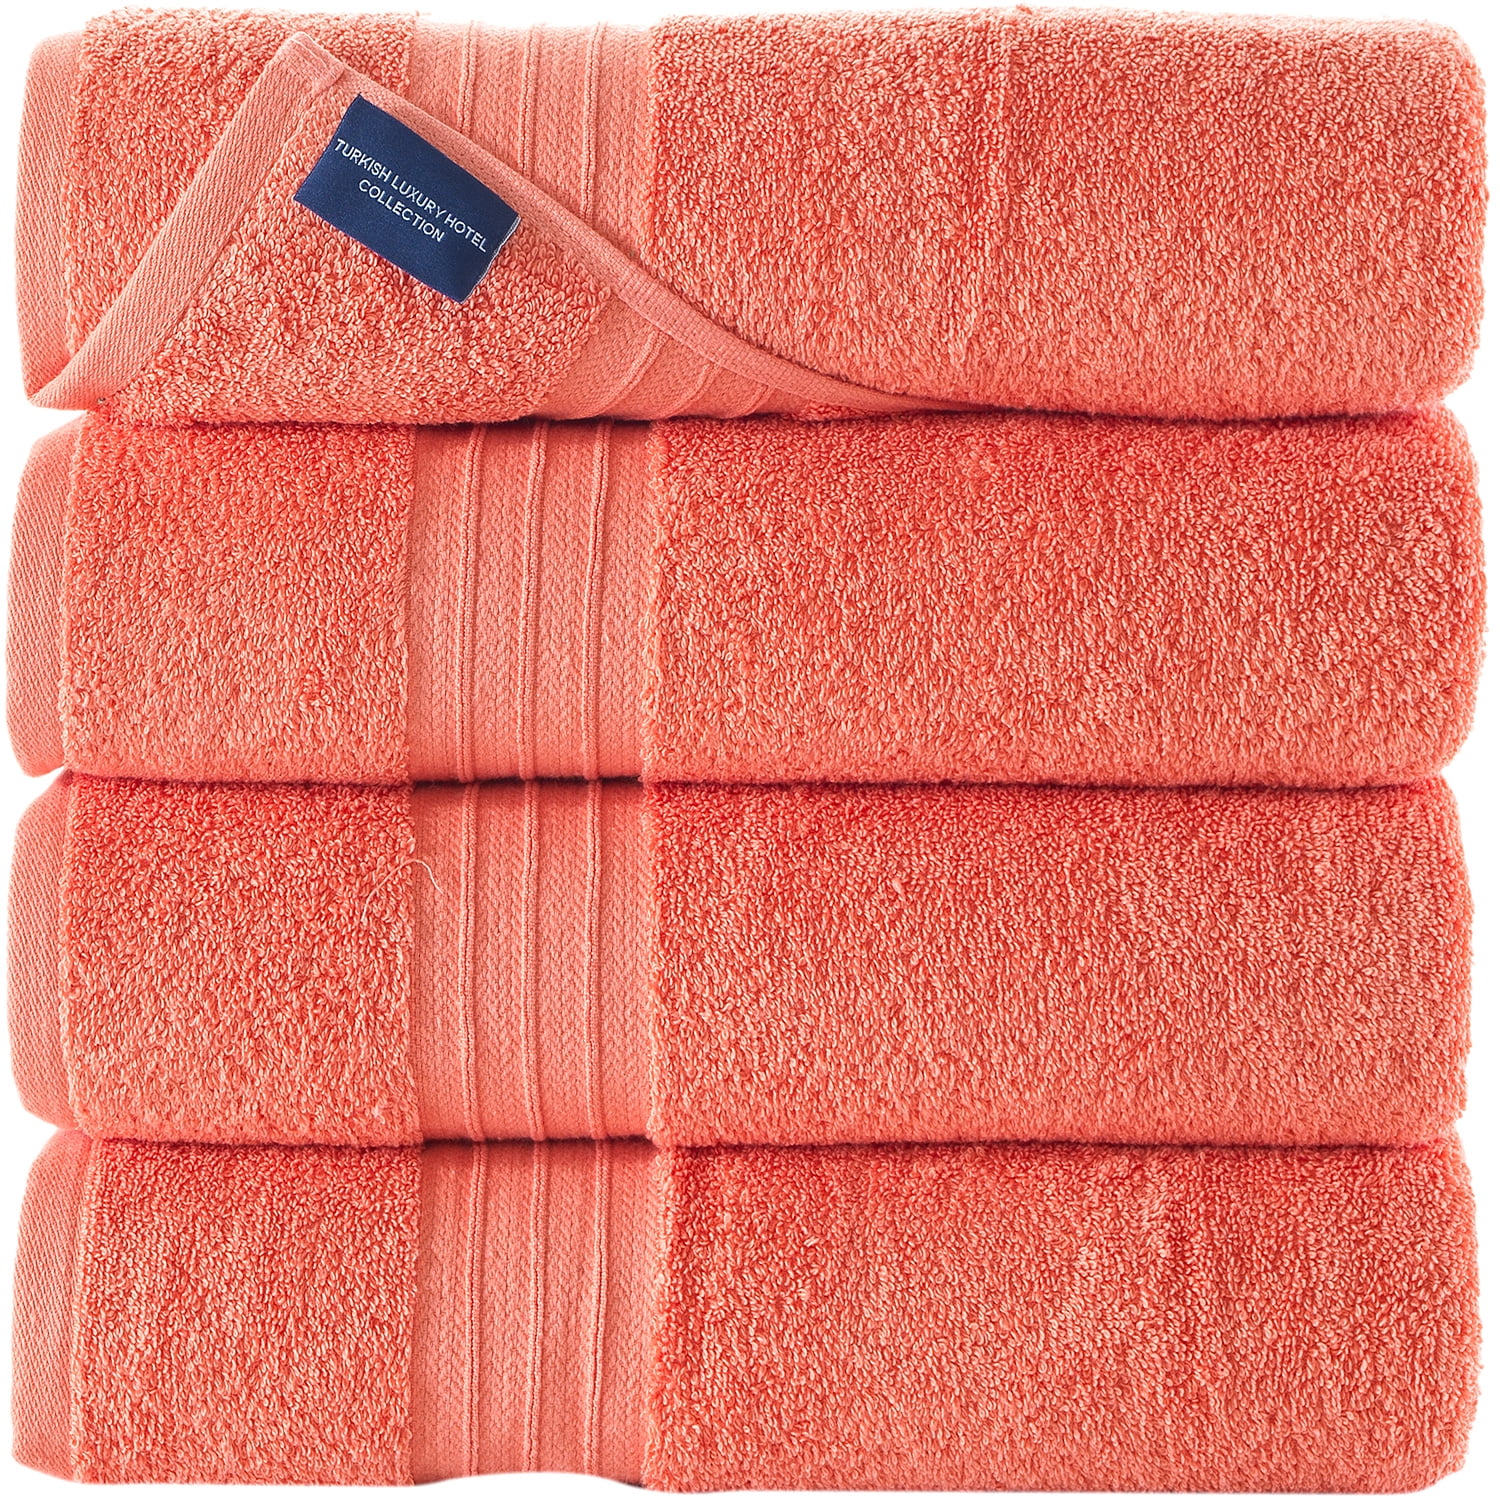 Pack Of 4* driSoft 100% Cotton Hand Towels 13 x 13 In In CORAL